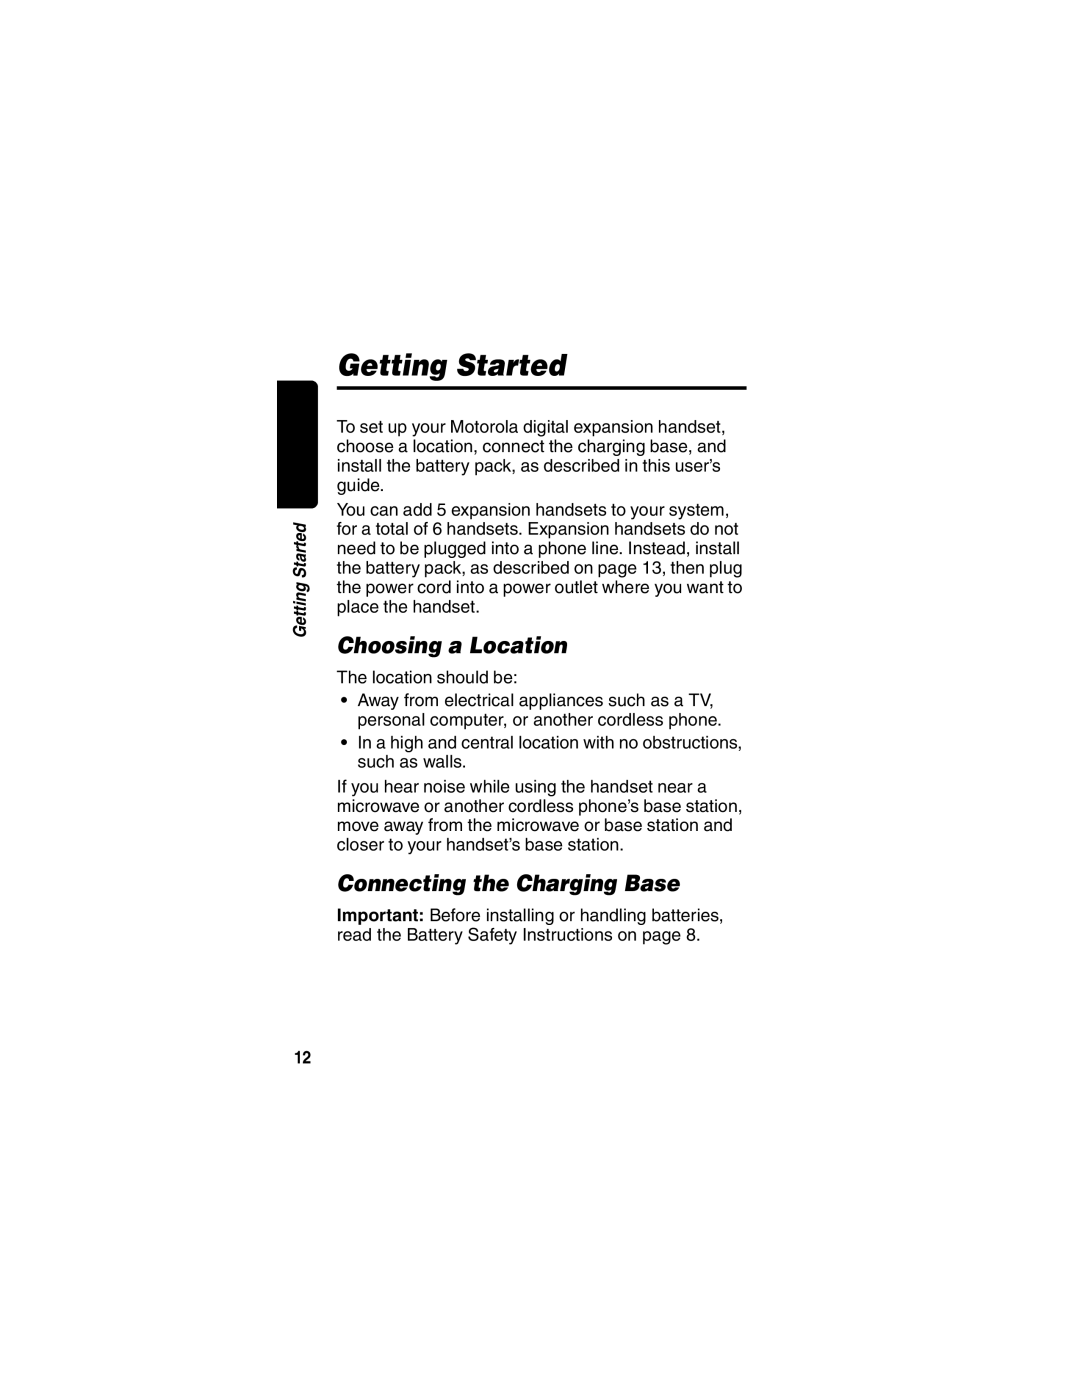 Motorola MD60 Series manual Choosing a Location, Connecting the Charging Base 